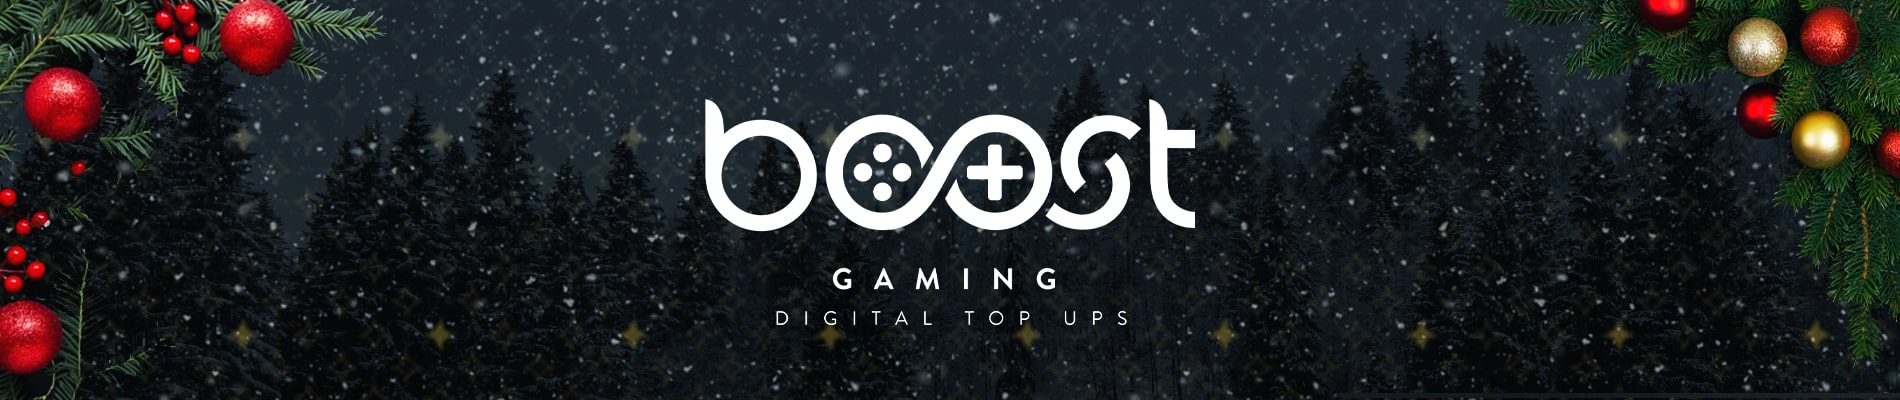 Boost Gaming Holiday Banner